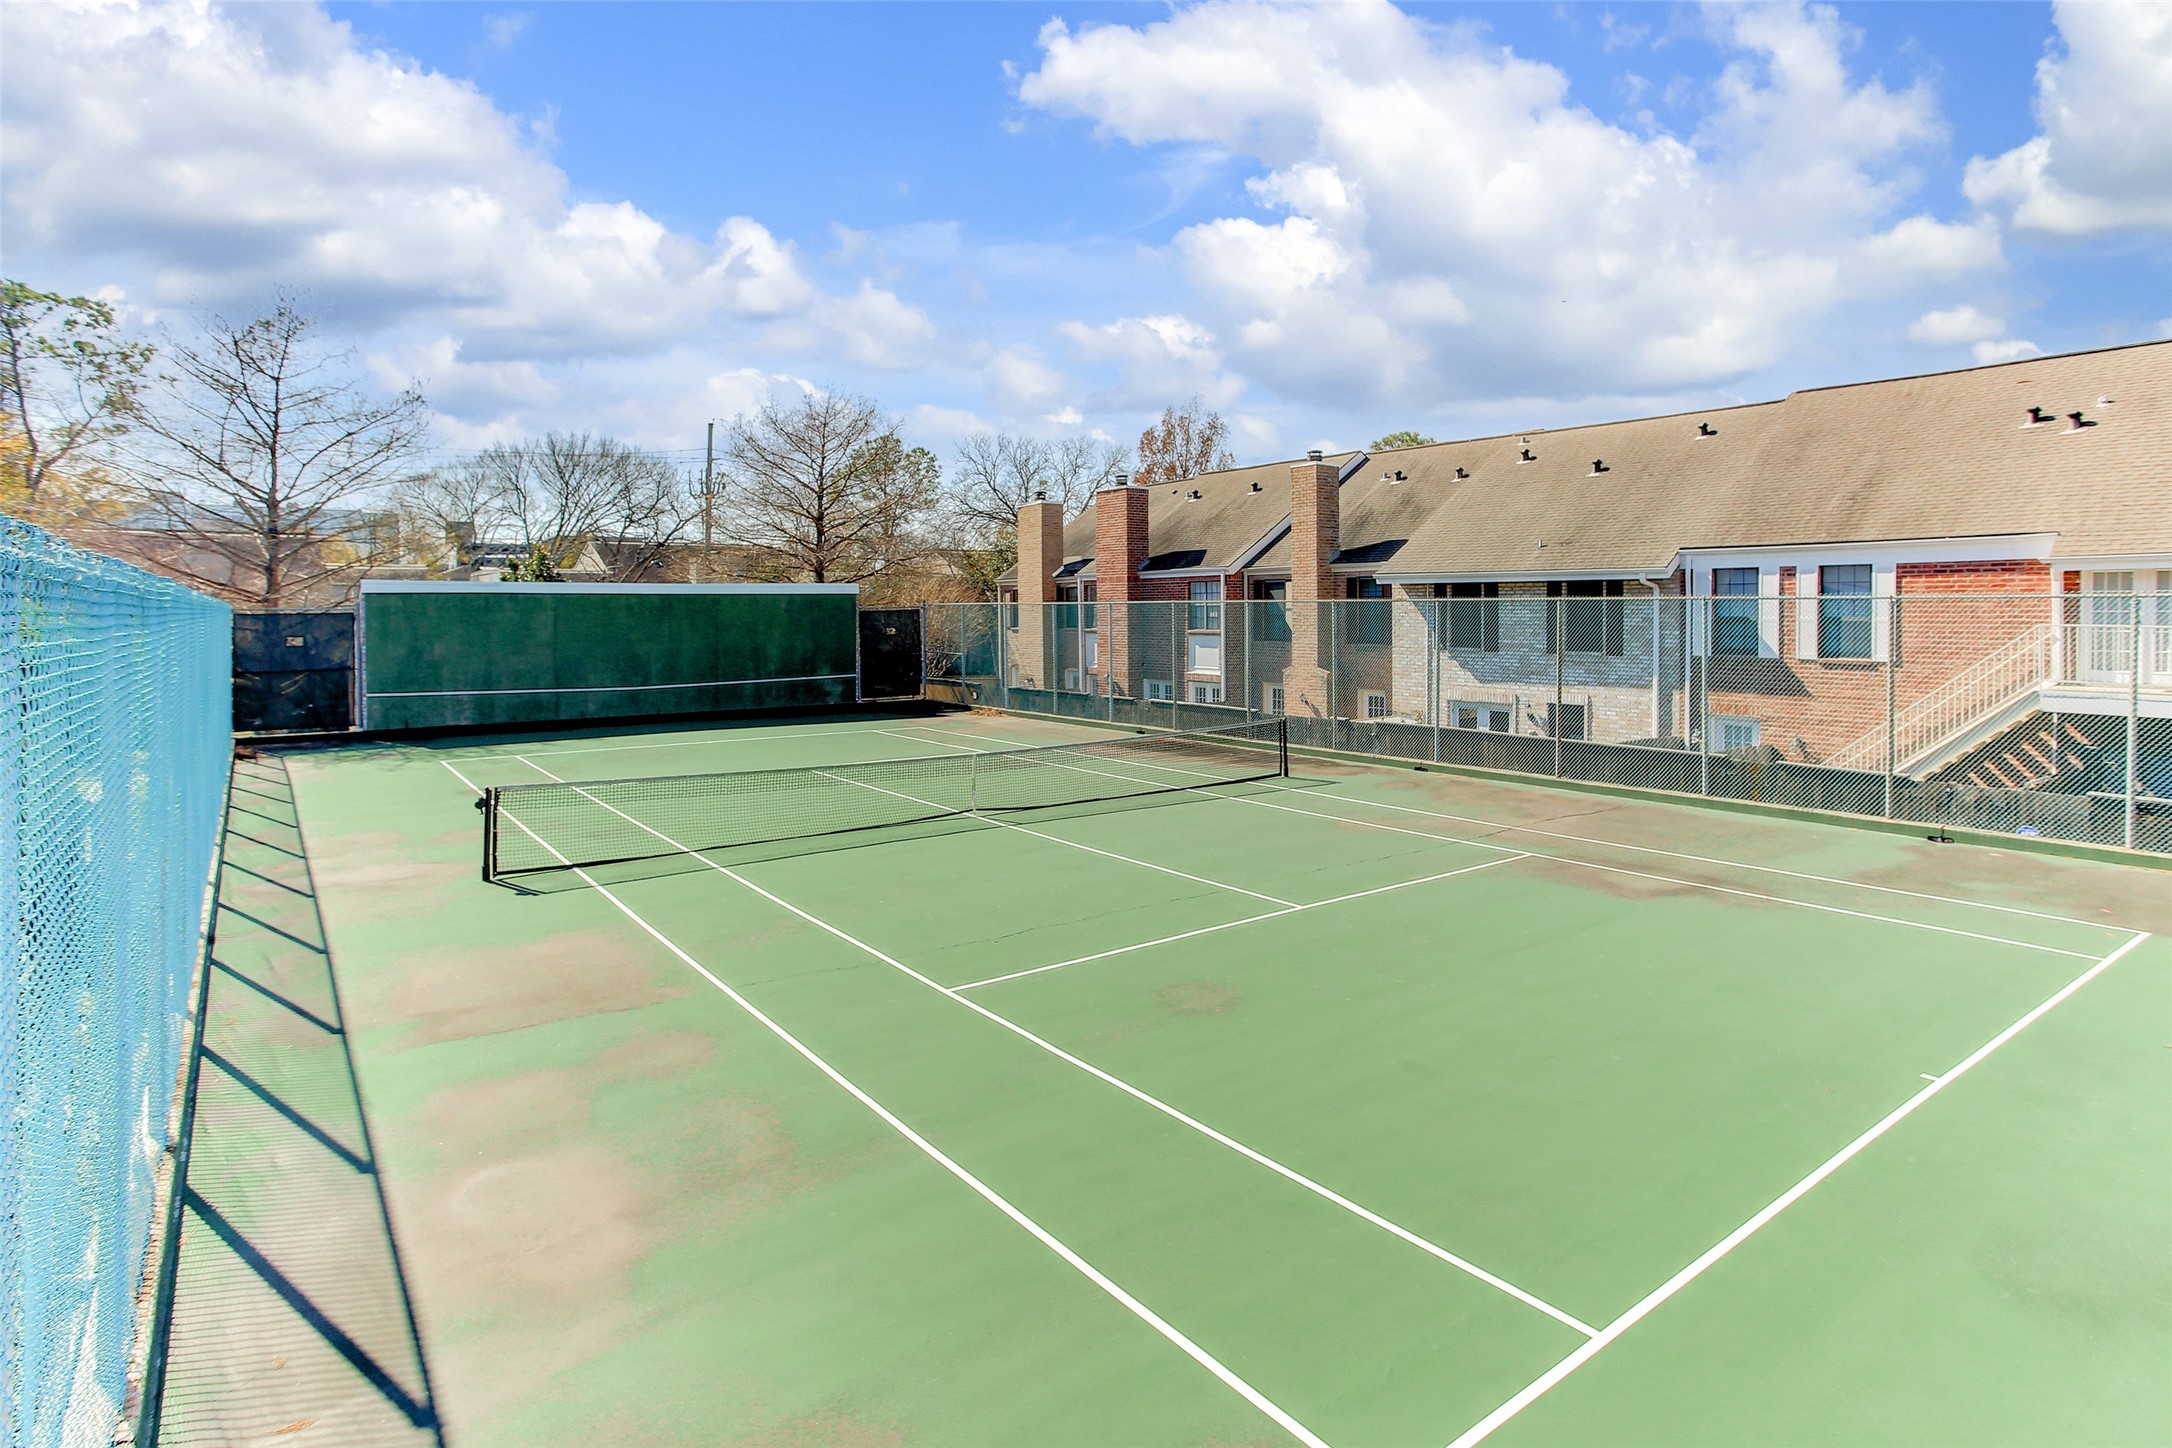 This fantastic amenity offers residents easy and quick access for them to engage in and enjoy a fun and invigorating game of pickleball without having to travel a significant distance from their homes.